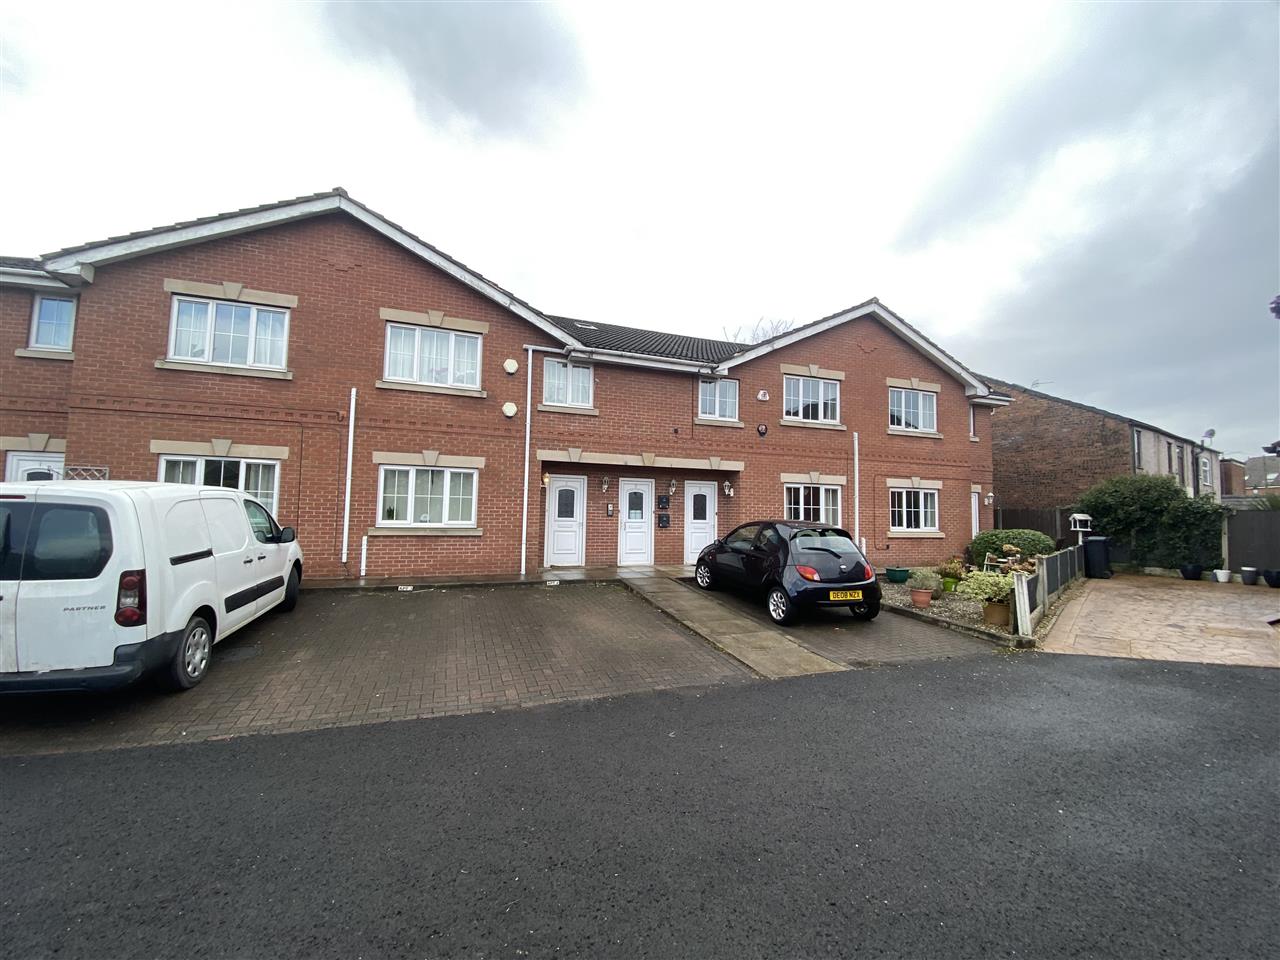 2 bed apartment to rent in Alden Court, Westhoughton - Property Image 1